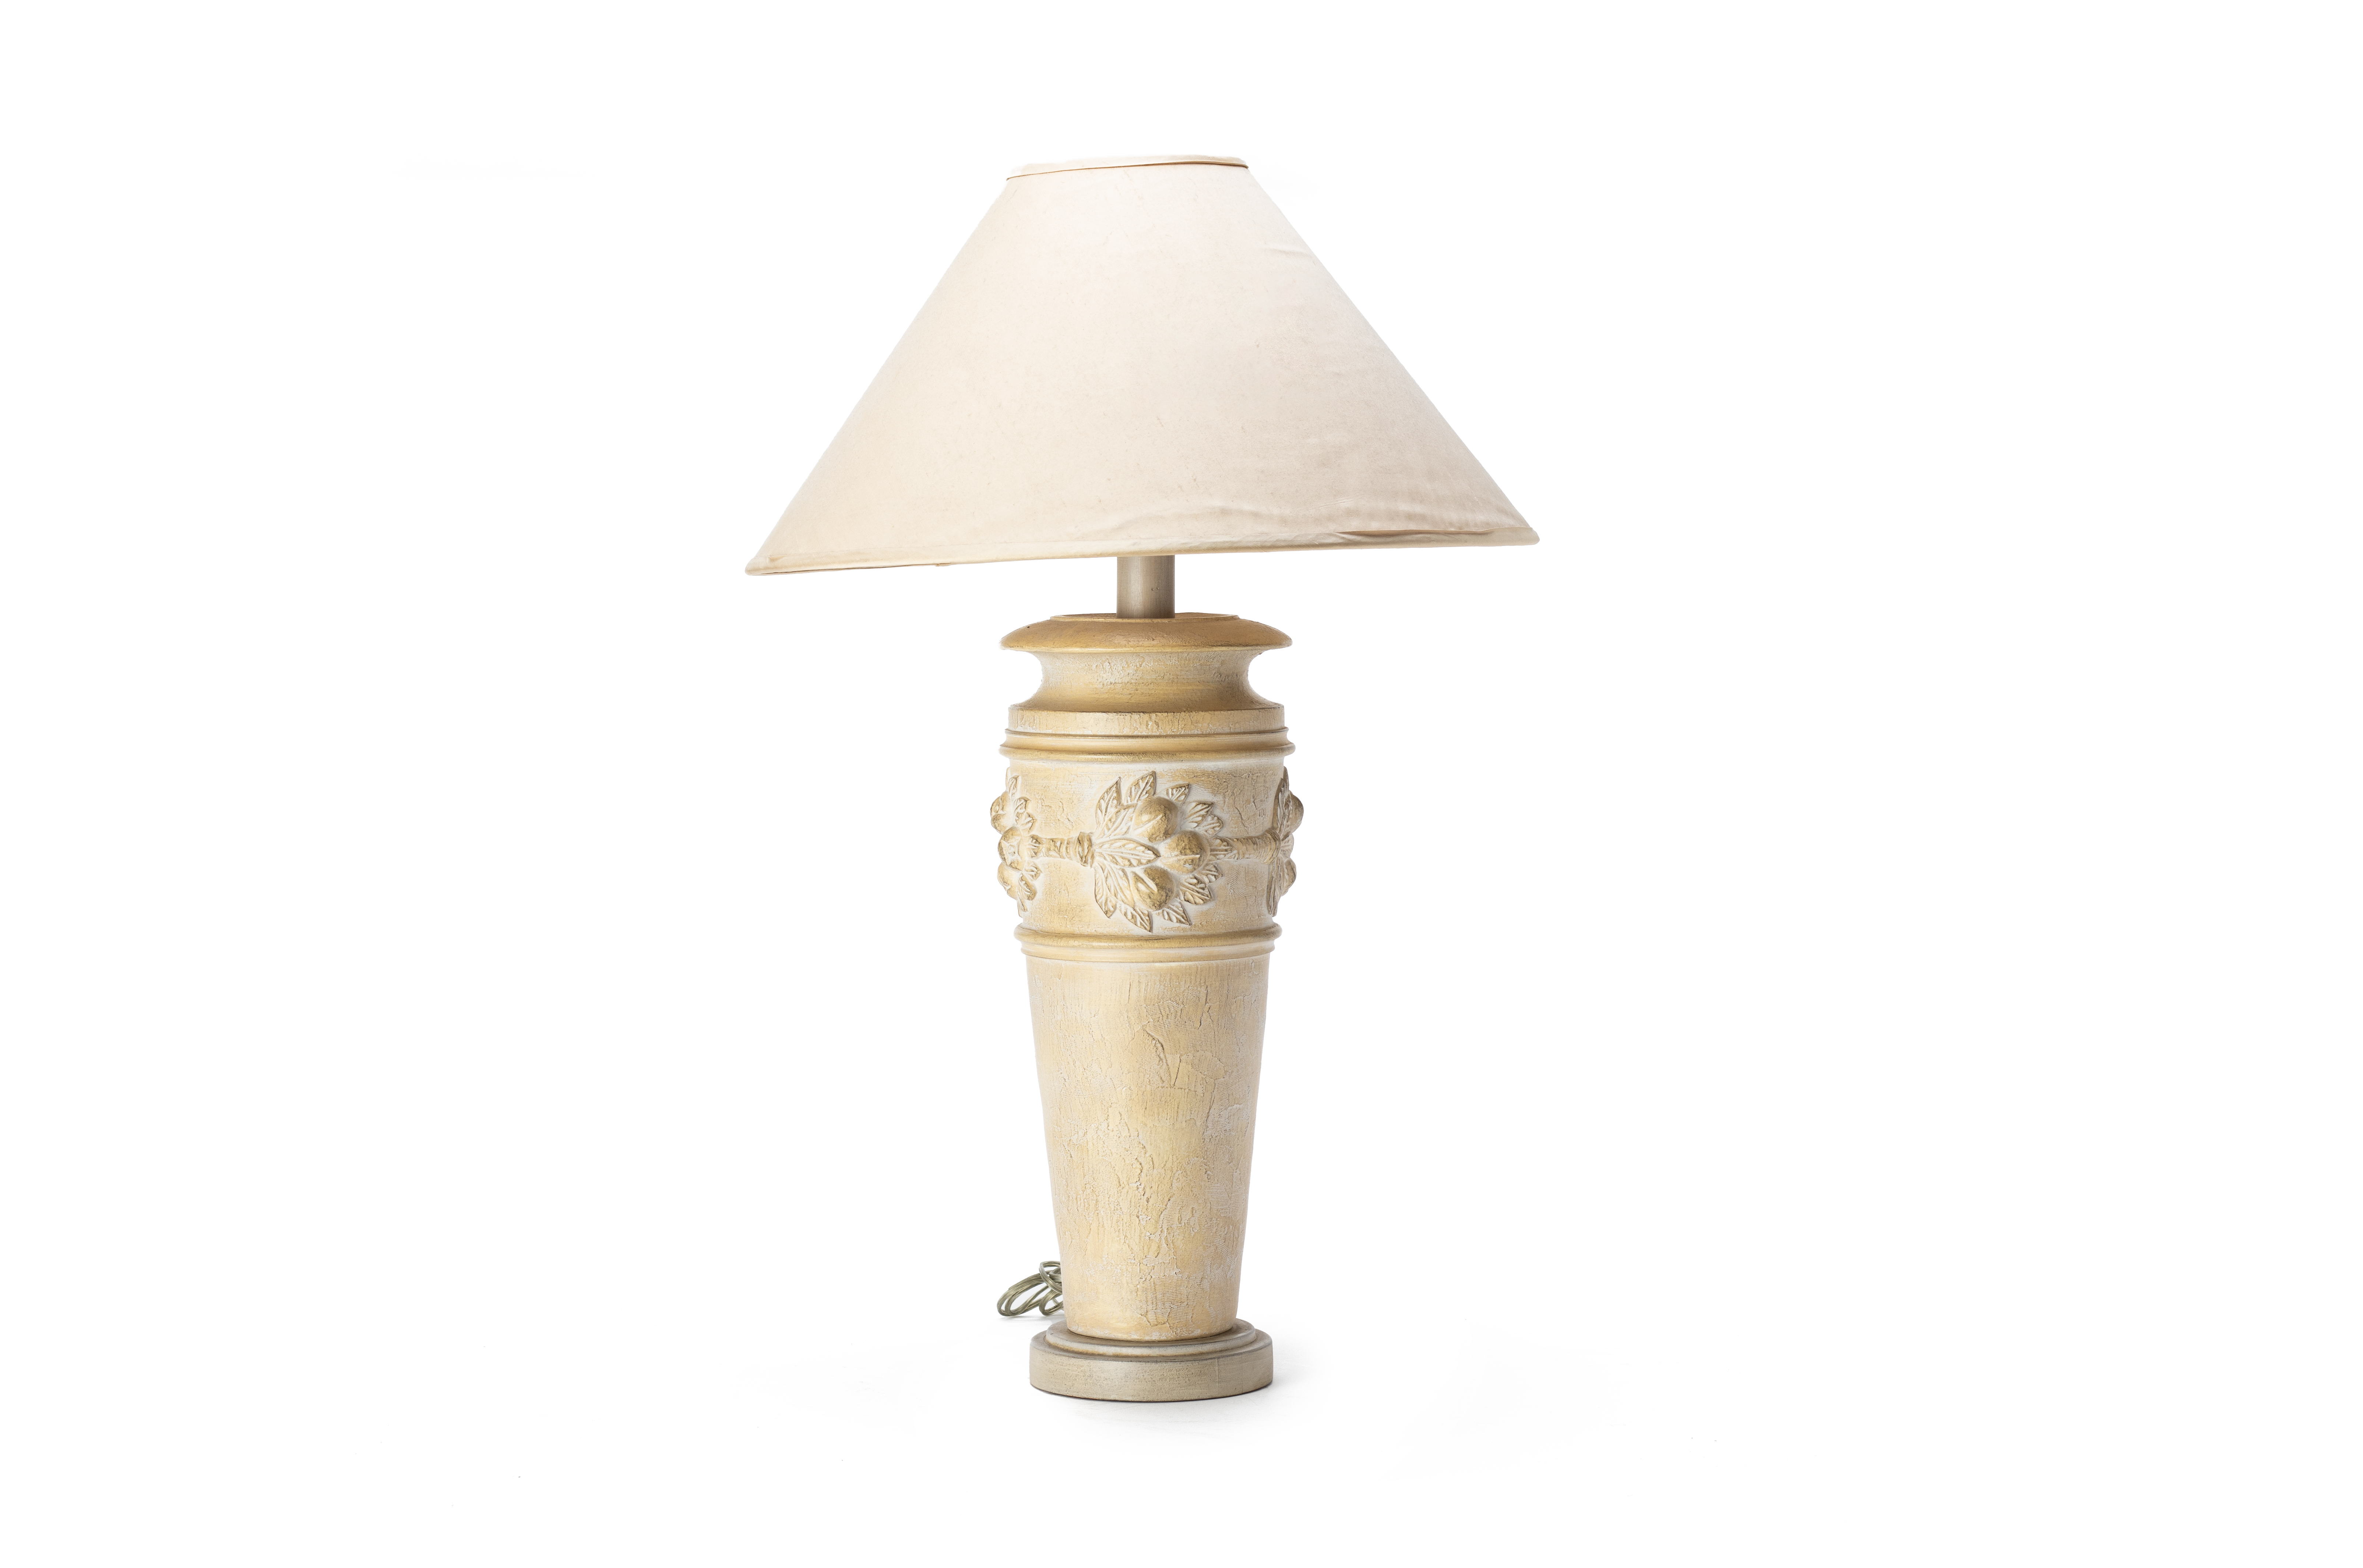 A CASUAL LAMPS OF CALIFORNIA TABLE LAMP